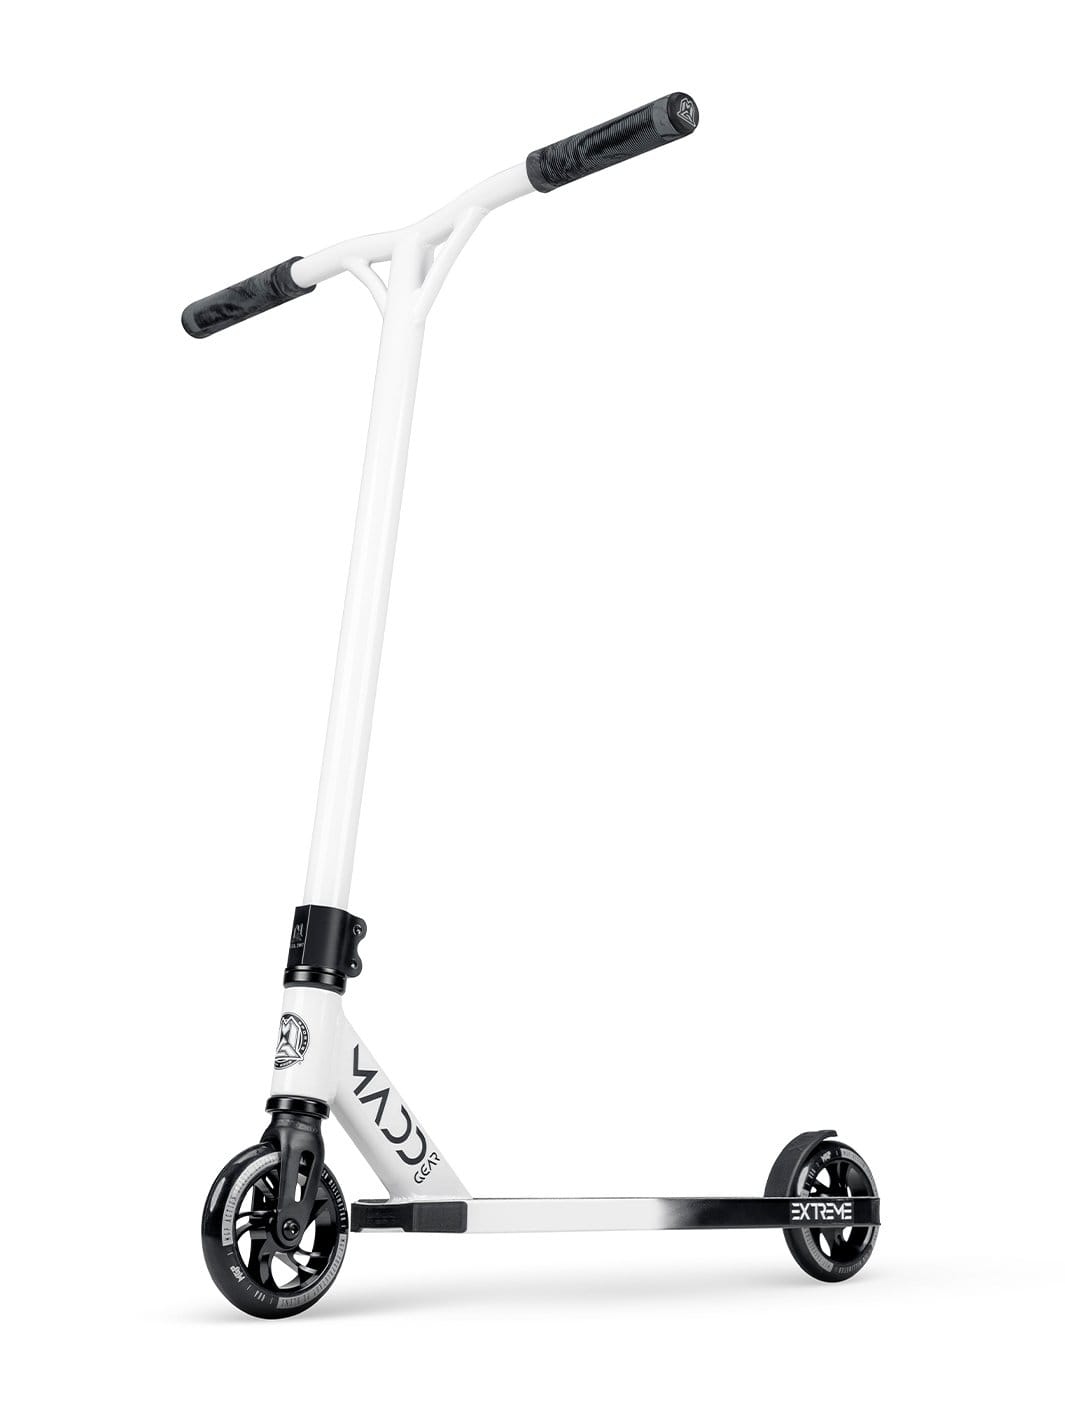 MGP Madd Gear Renegade Extreme Stunt Pro Scooter Lightweight White Black Best